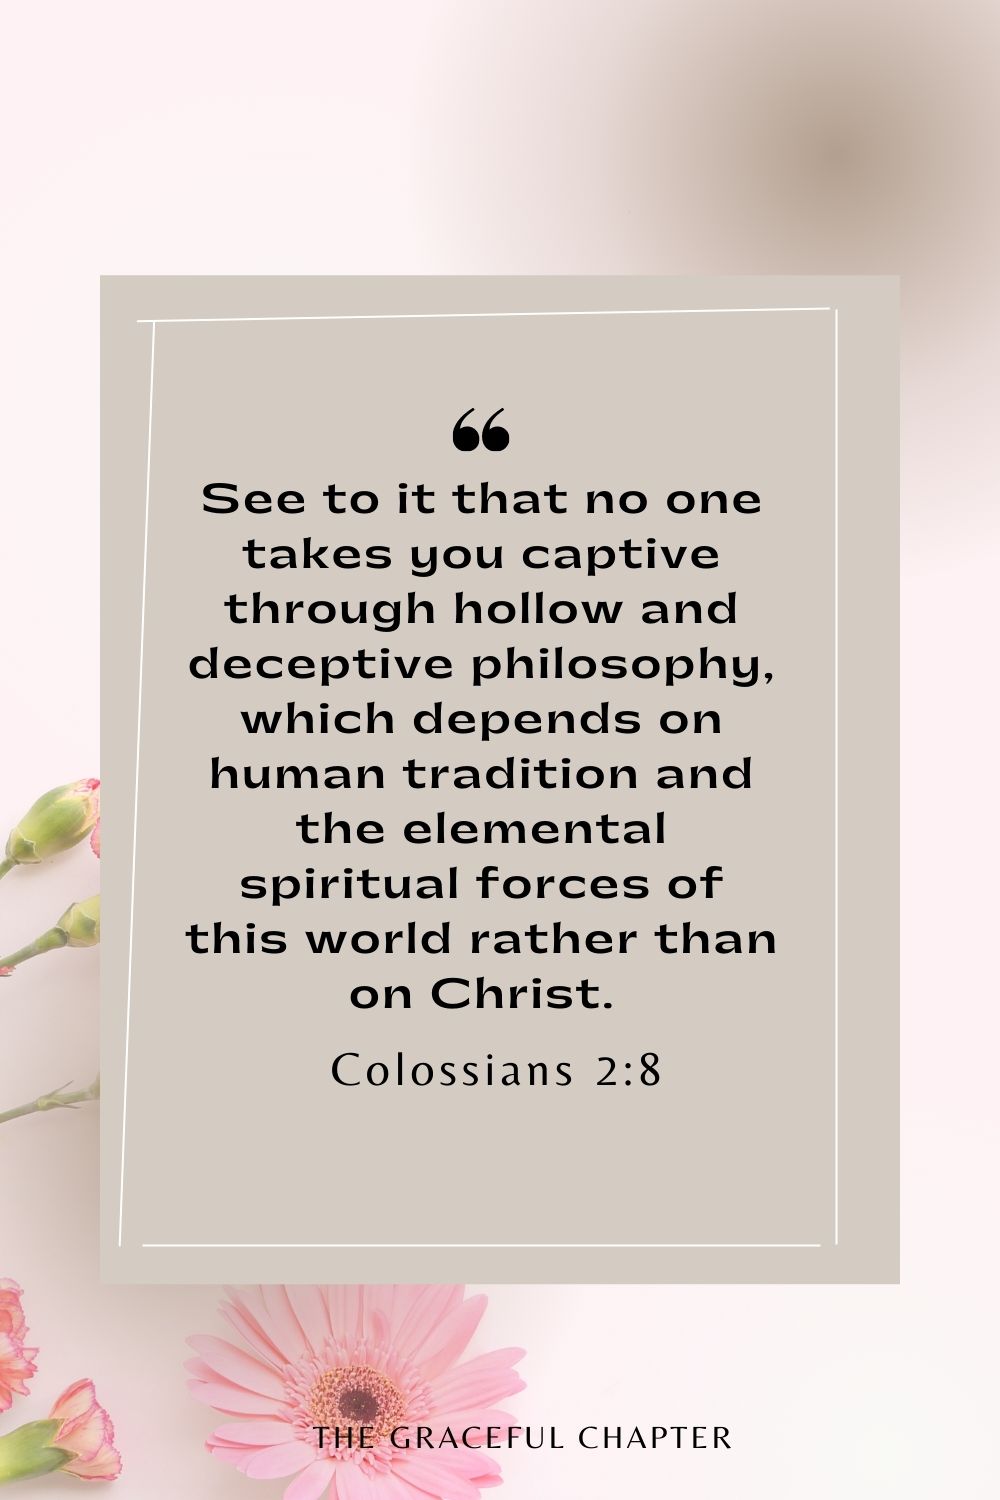 See to it that no one takes you captive through hollow and deceptive philosophy, which depends on human tradition and the elemental spiritual forces of this world rather than on Christ. Colossians 2:8